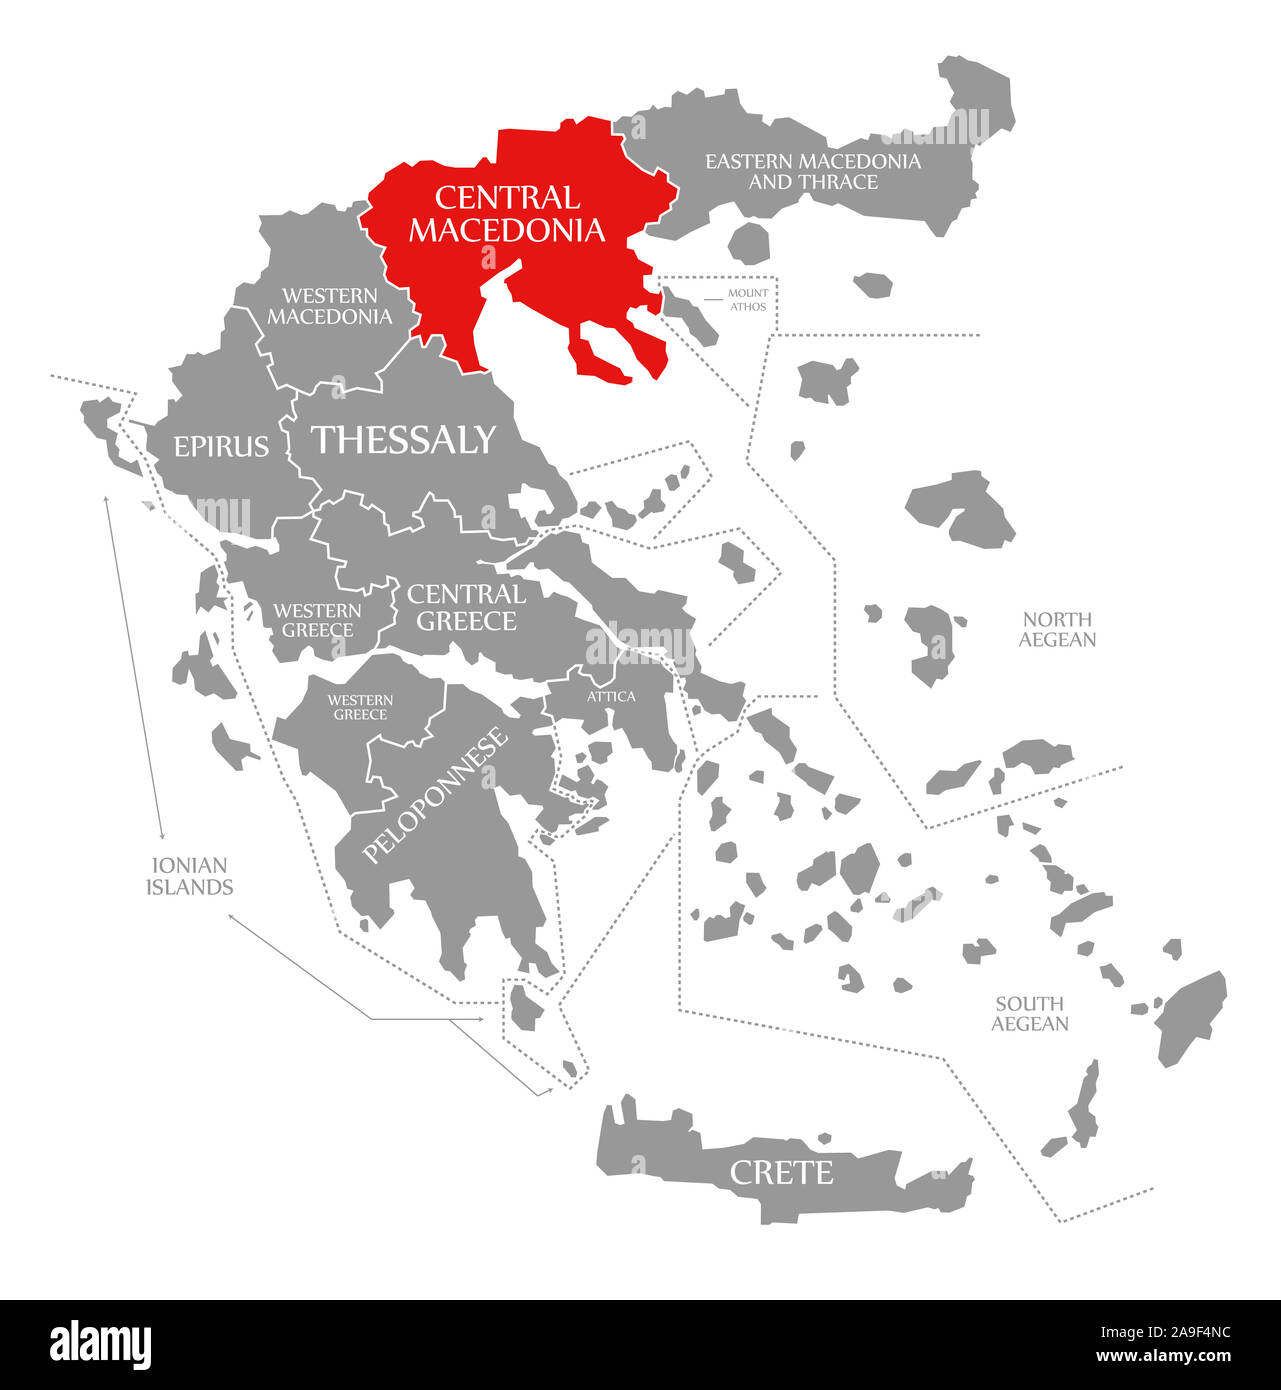 Central Macedonia red highlighted in map of Greece Stock Photo